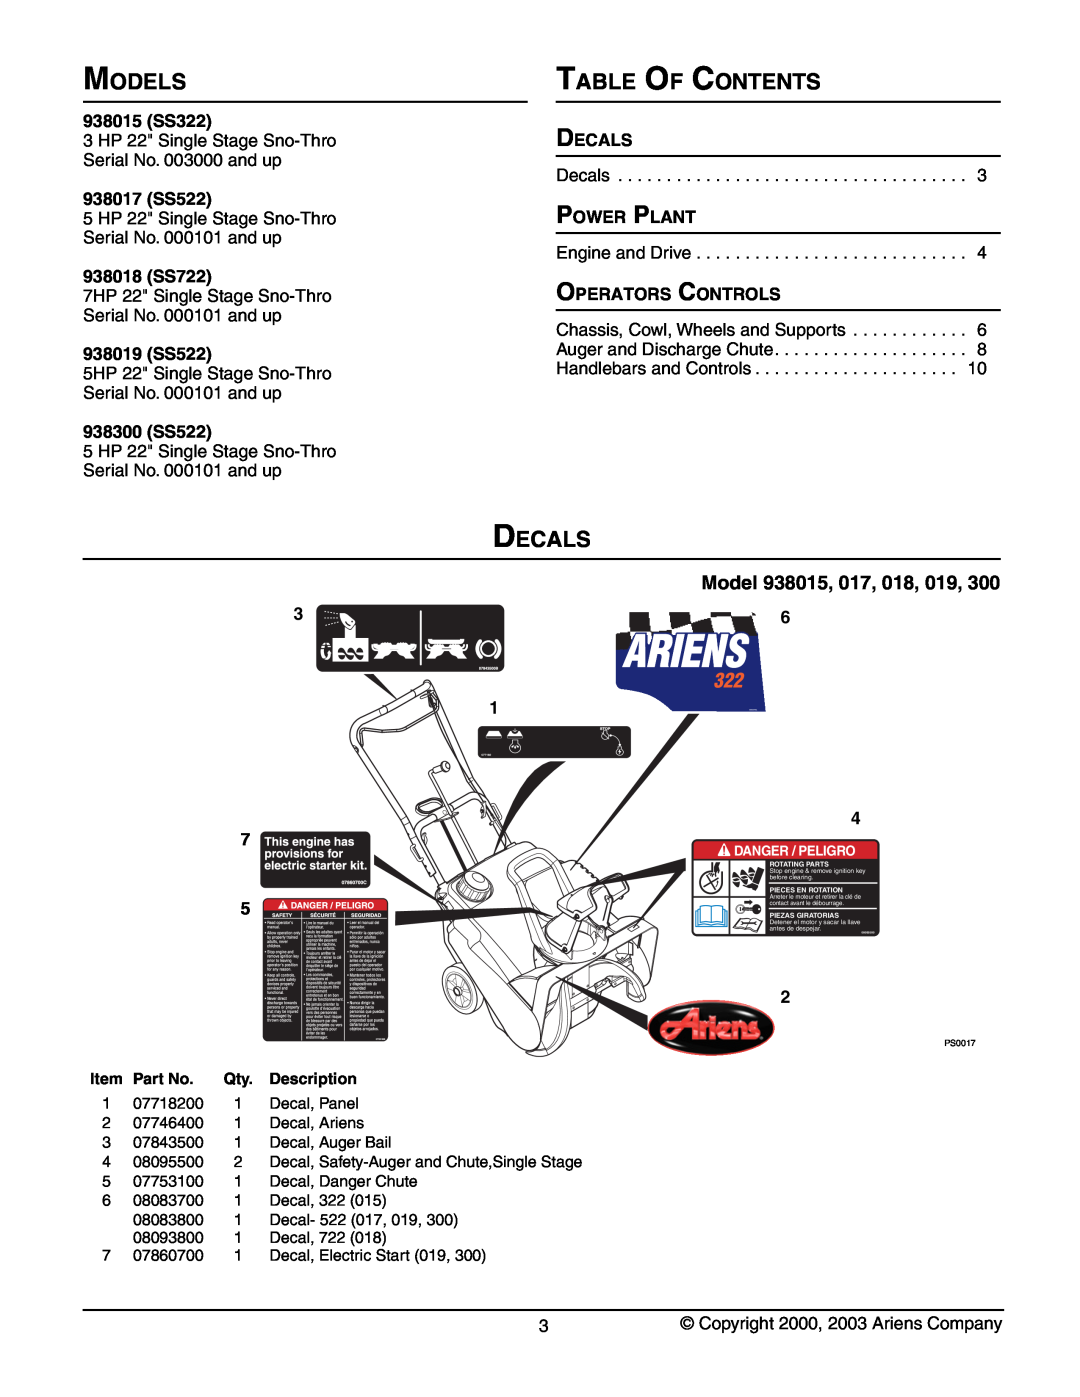 Ariens 938017 - 522, 938300 - 522, 938019 - 522, 938018 - 722, 938015 - 322 manual Models, Table Of Contents, Decals 